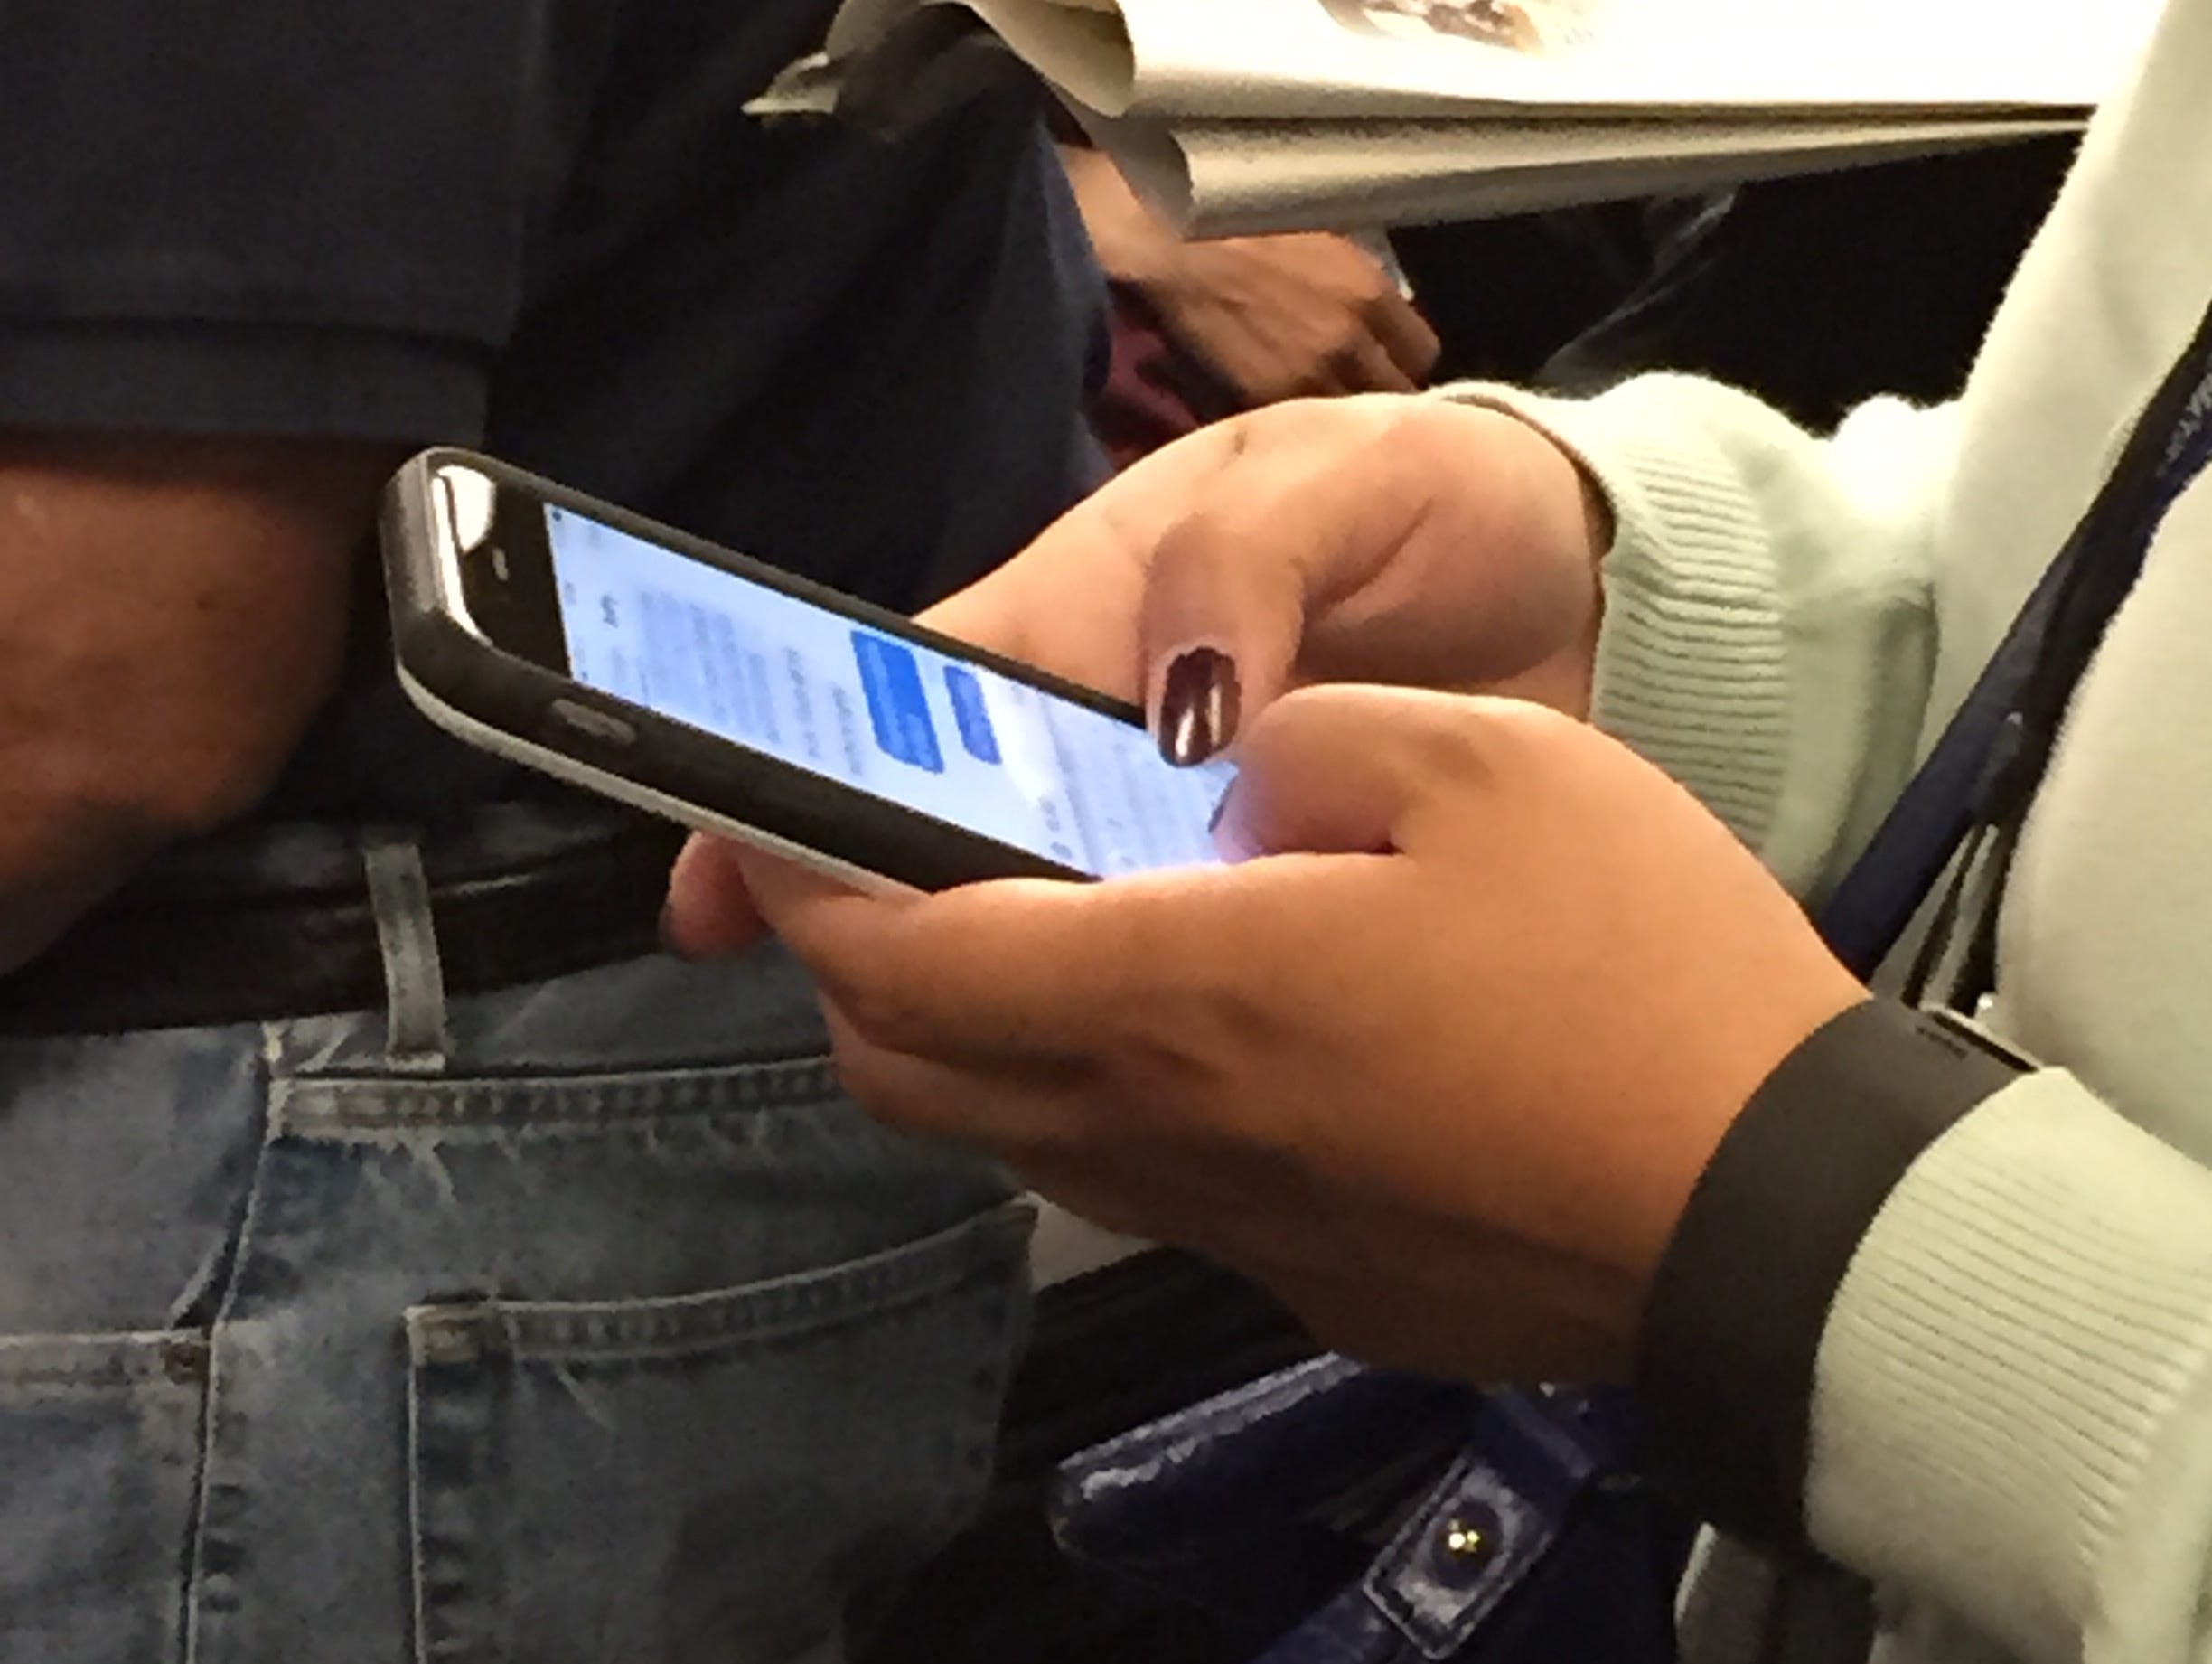 A rider texting on a BART train in San Francisco.